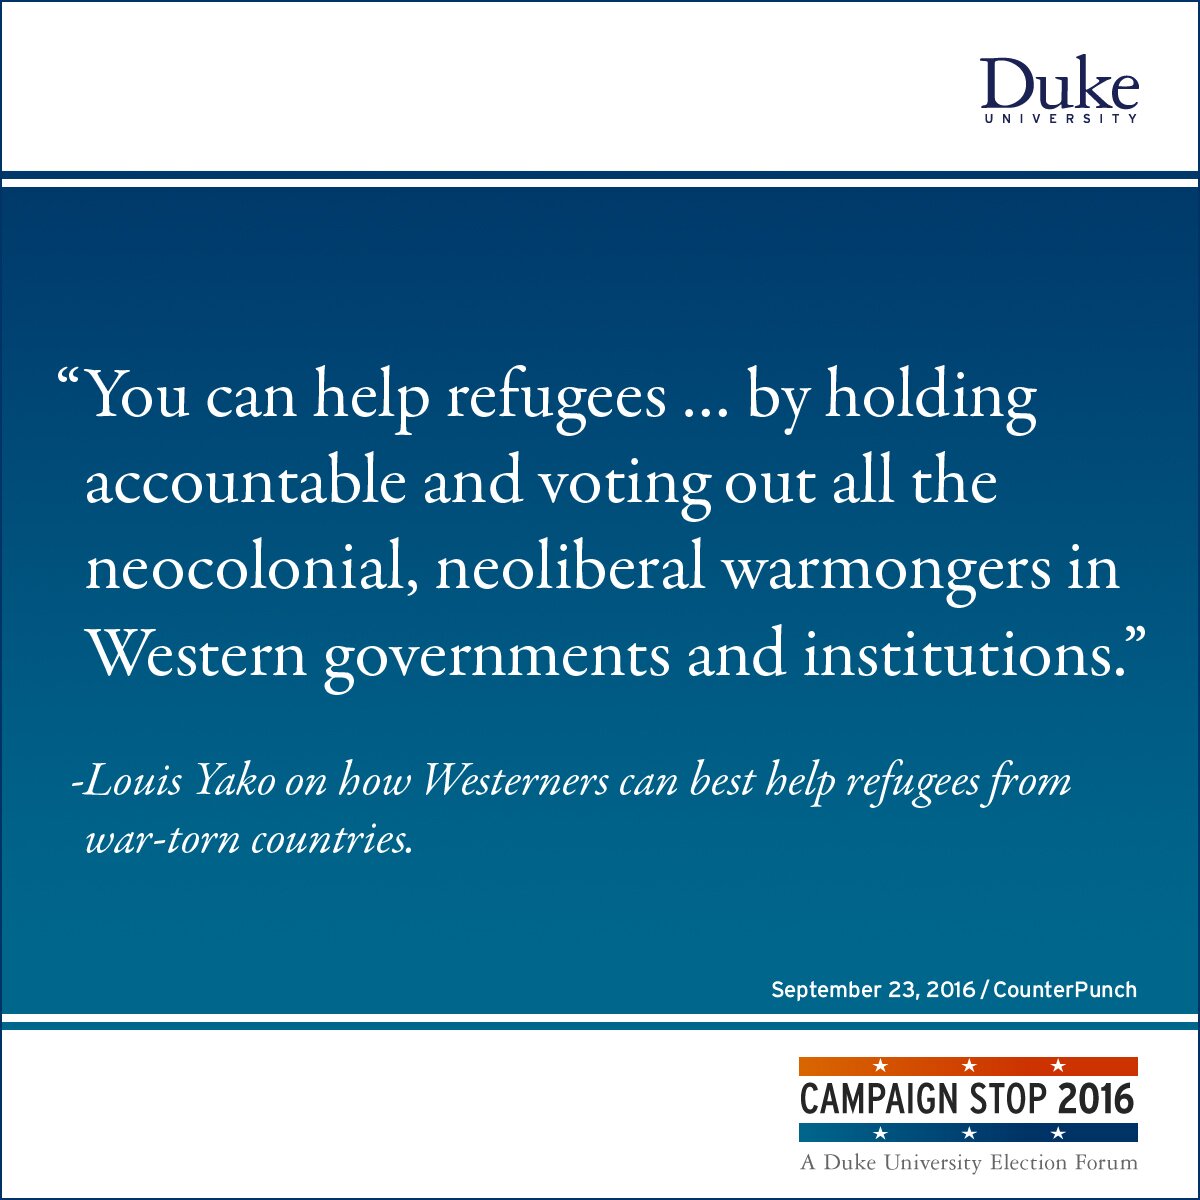 “You can help refugees … by holding accountable and voting out all the neocolonial, neoliberal warmongers in Western governments and institutions.” -Louis Yako on how Westerners can best help refugees from war-torn countries.